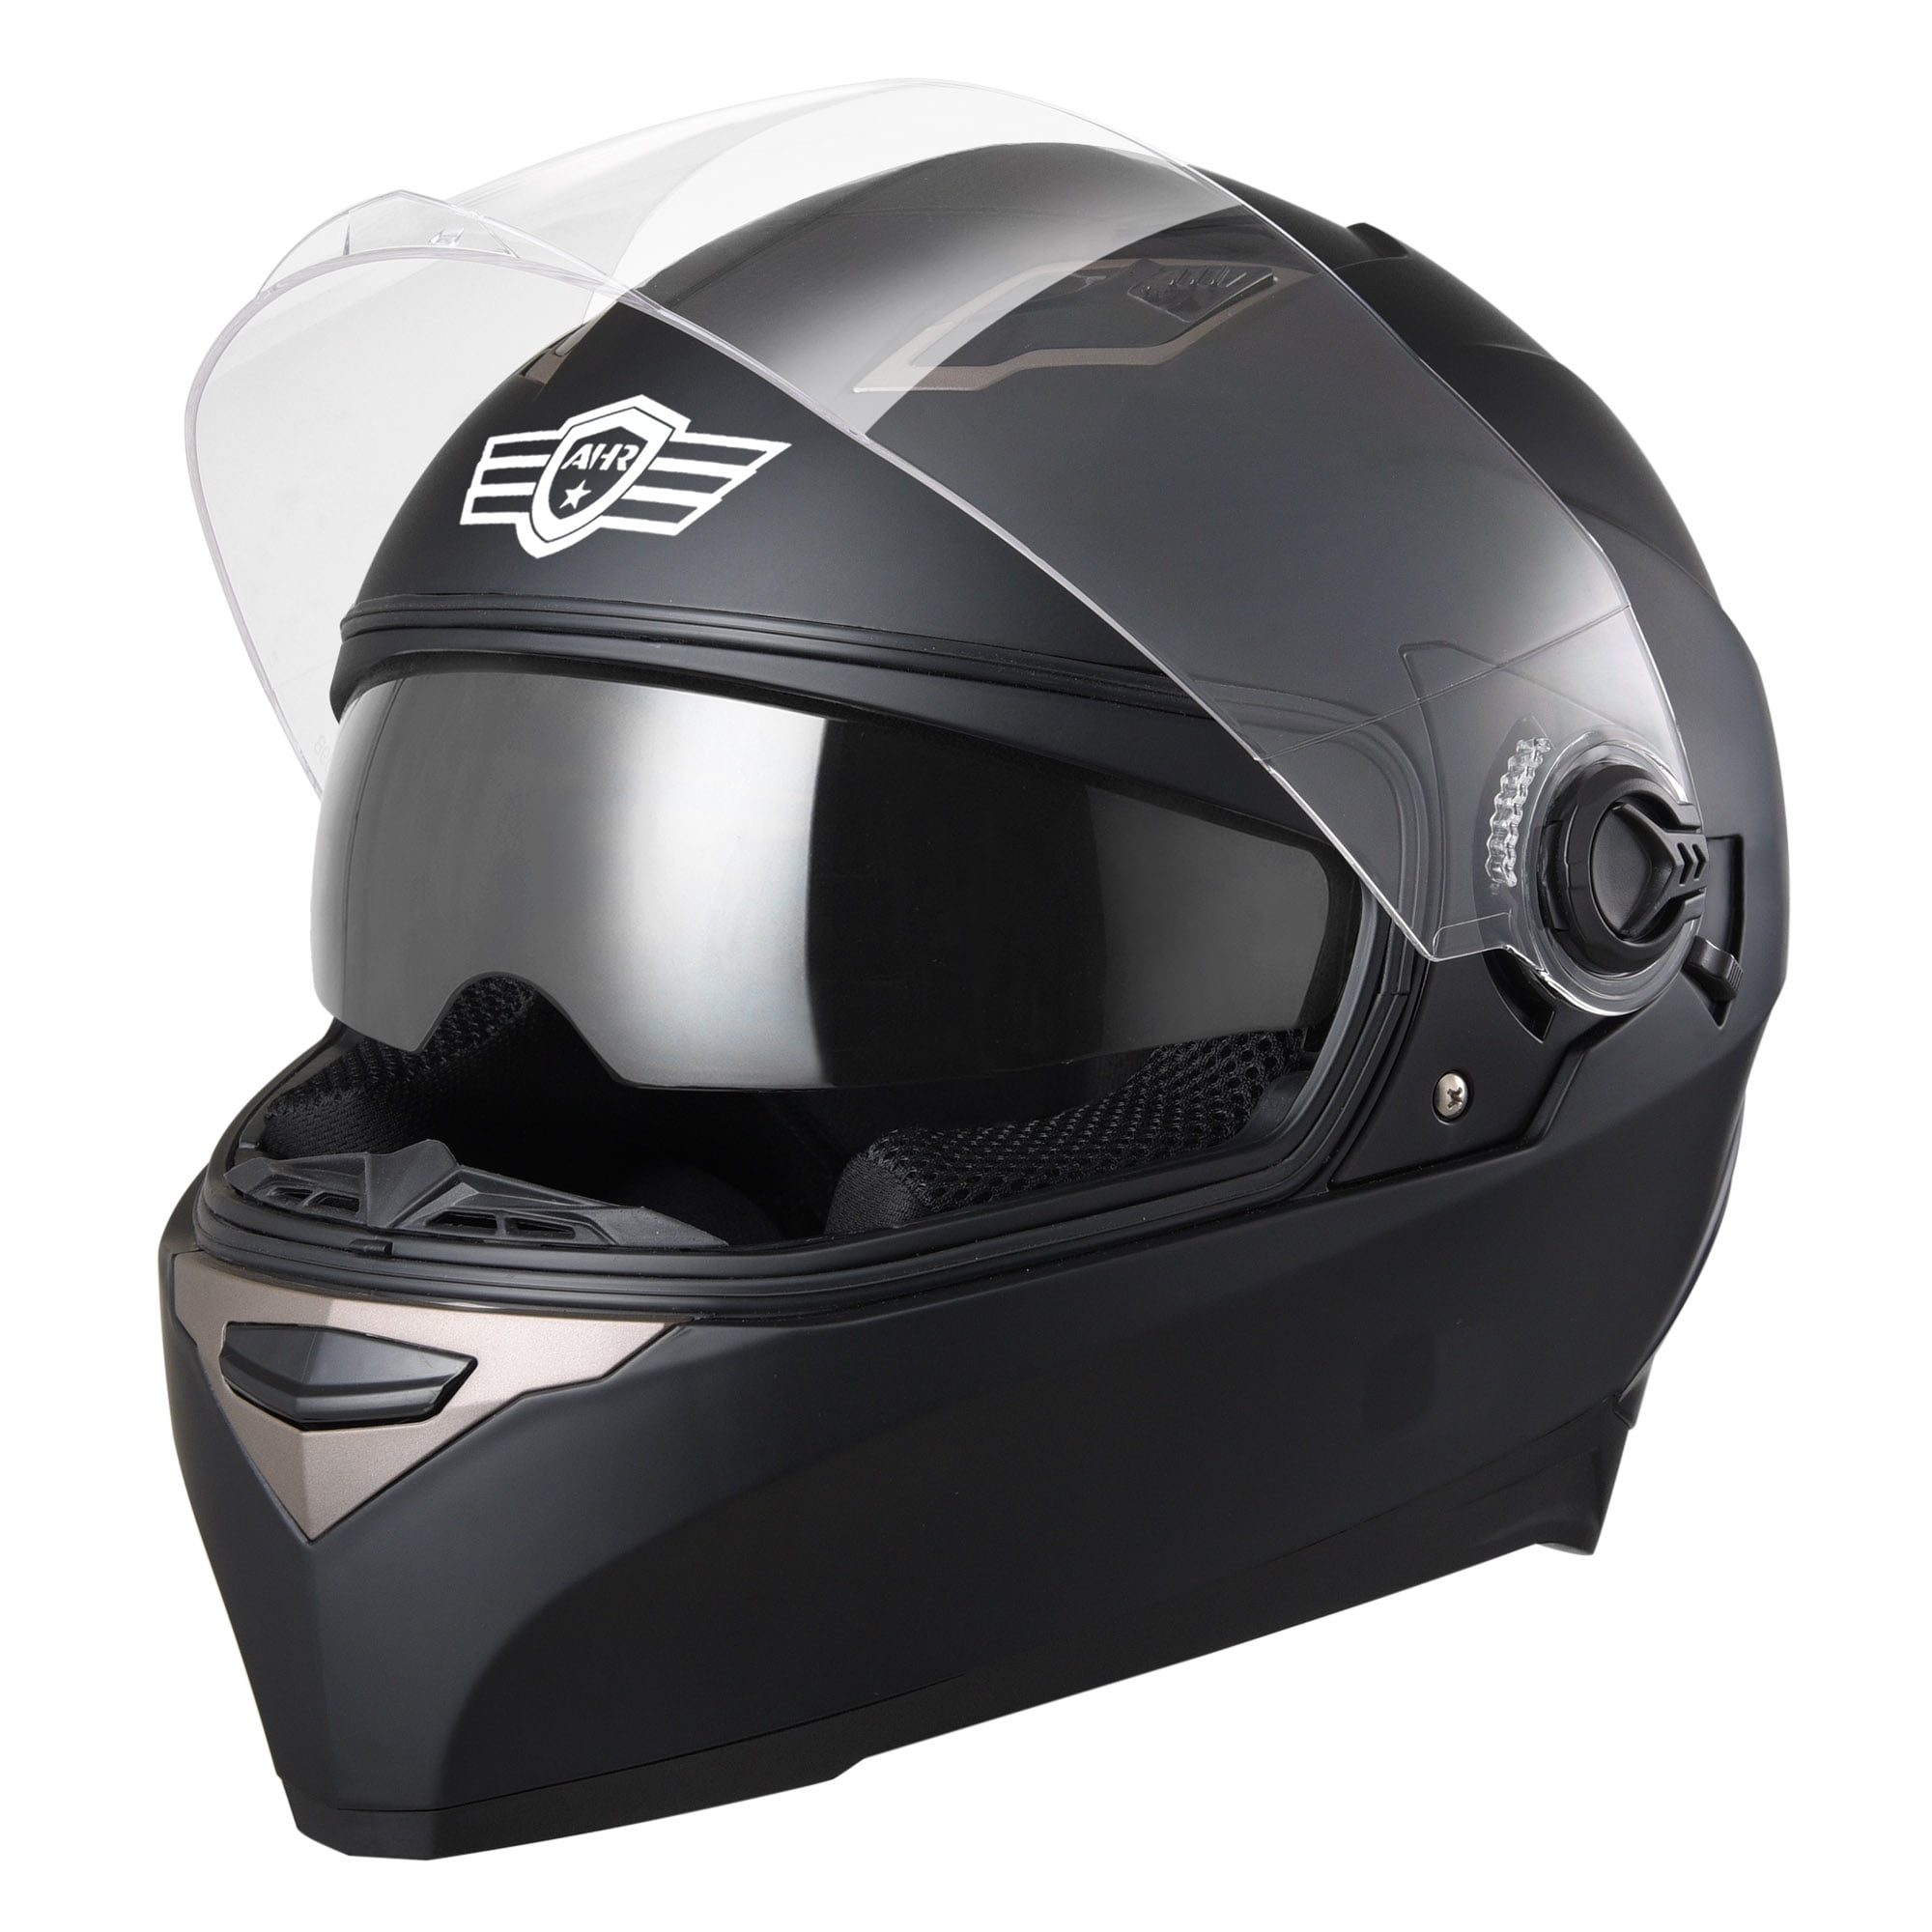 POLO HELMET WITH VIZER,FACE GUARD Ridding Helmet Grill Helmet GRILL Exclusive 